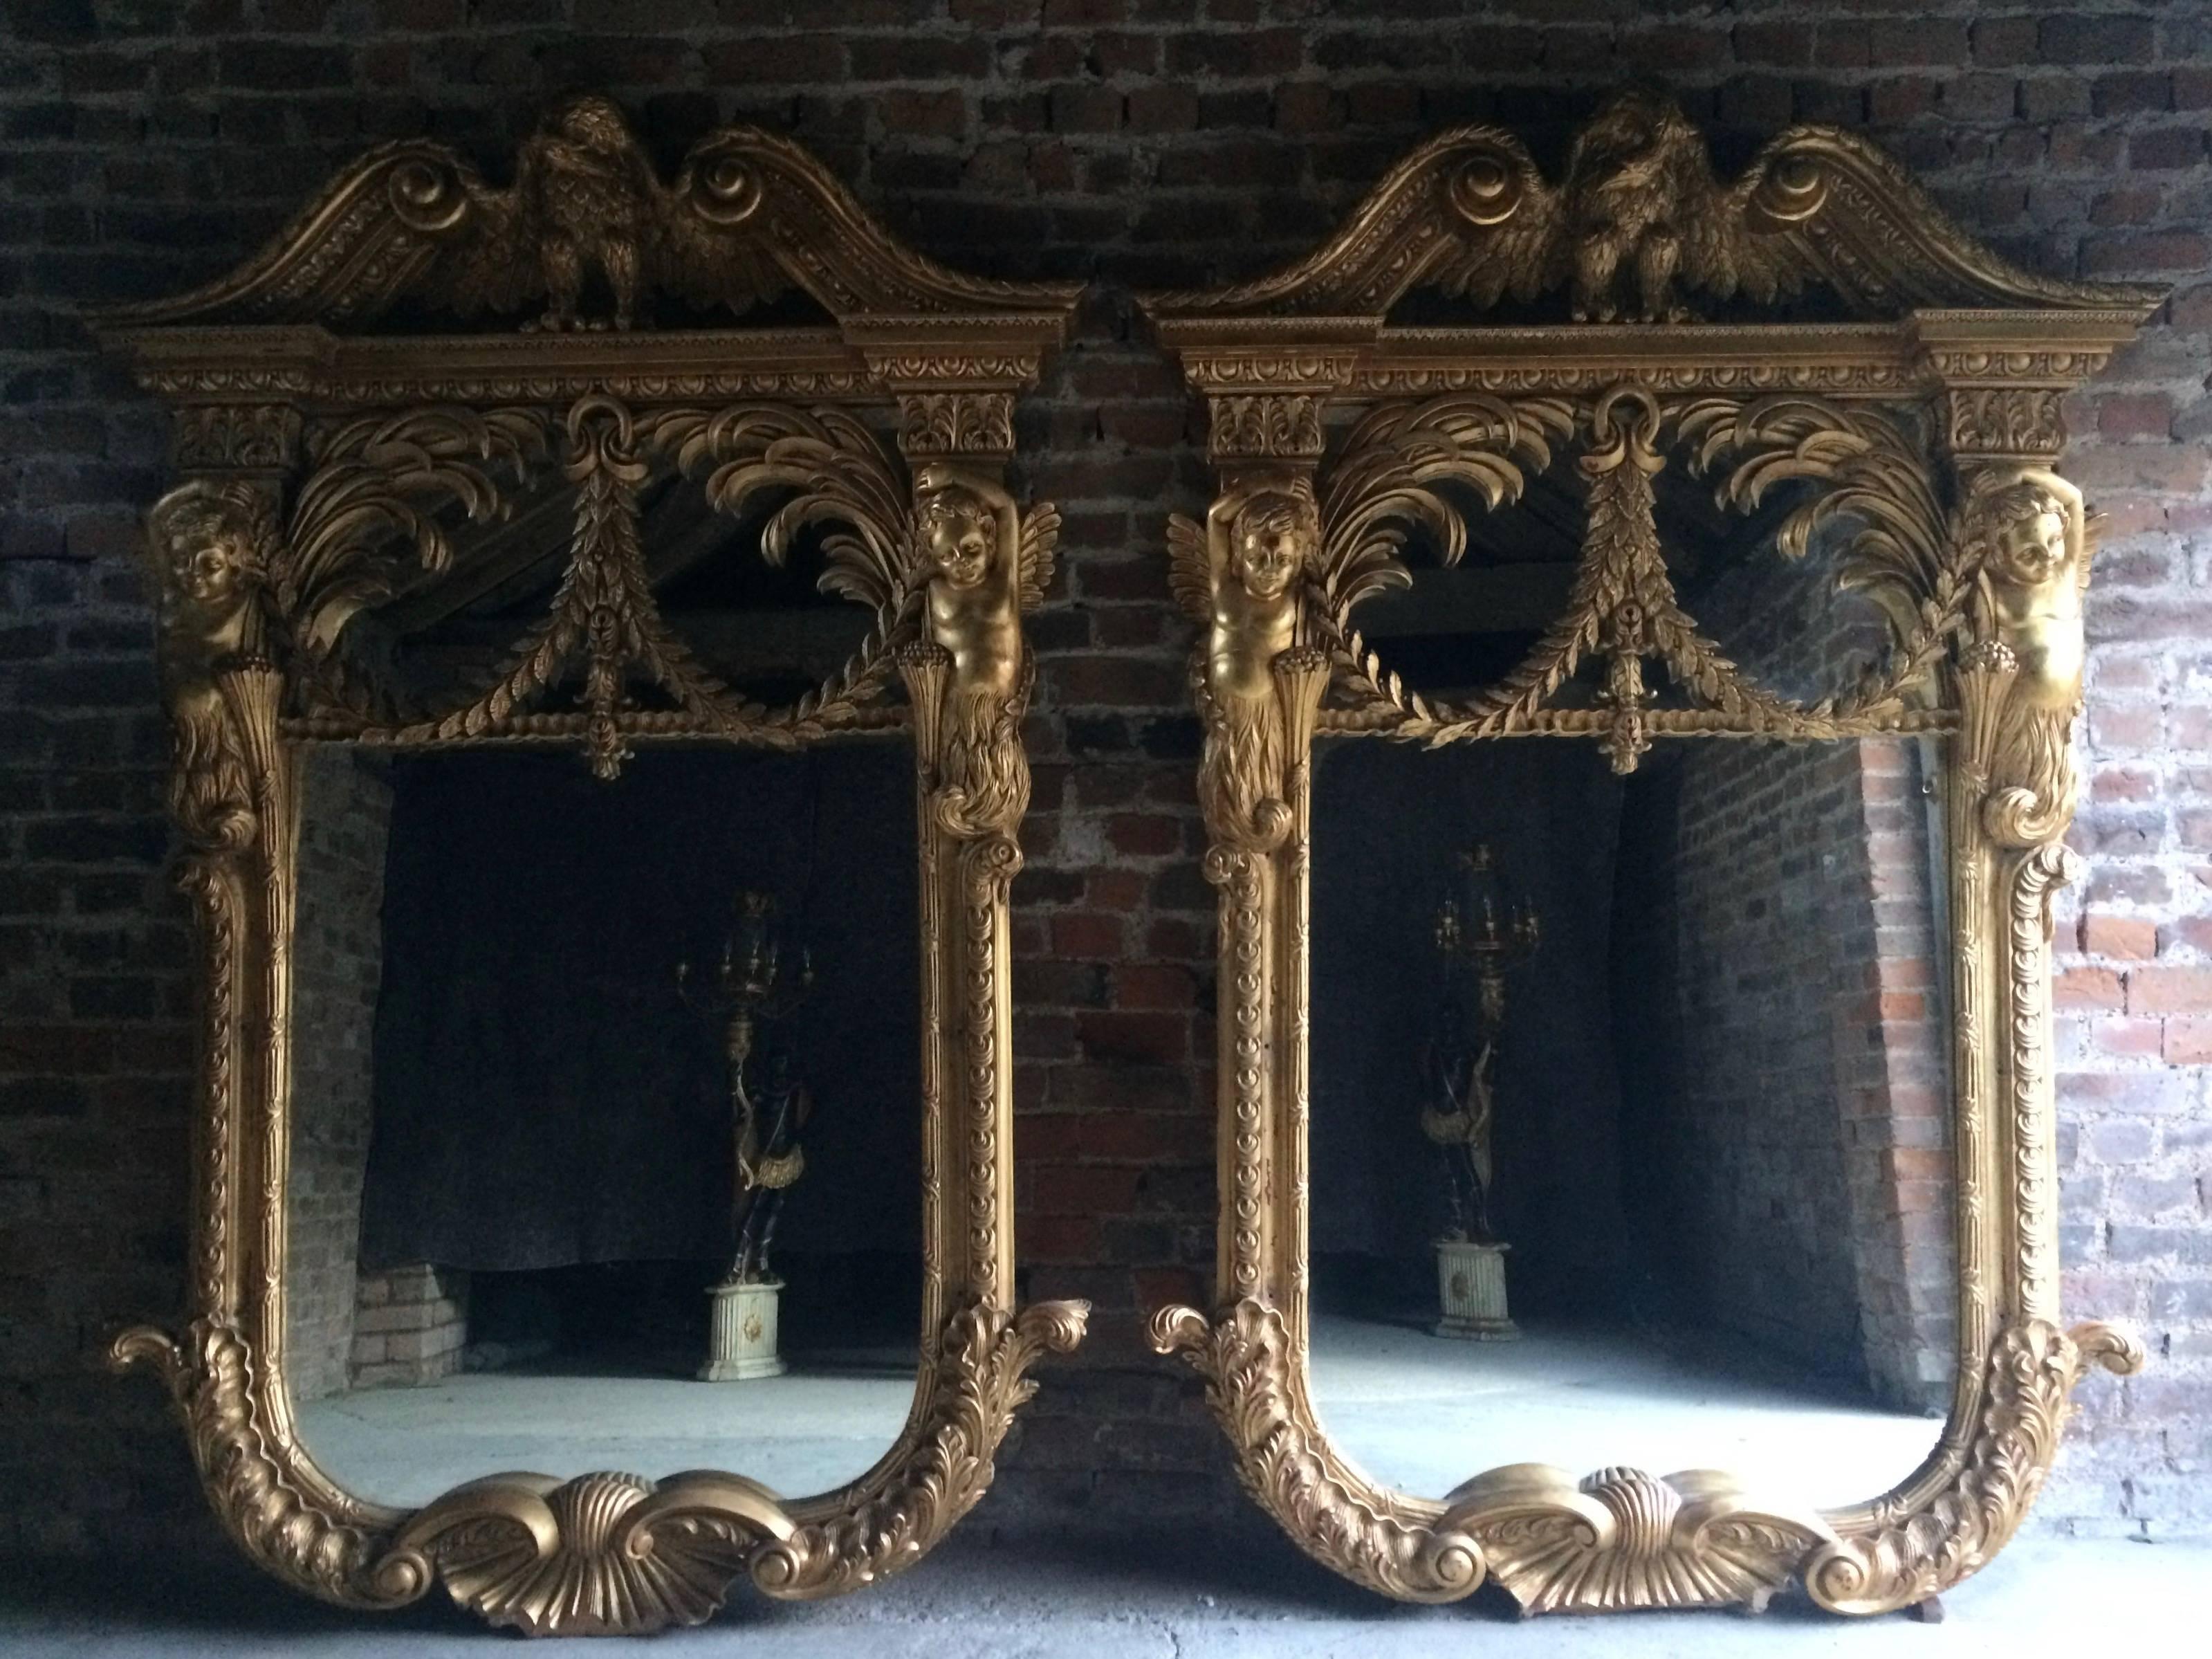 A pair of very large carved French giltwood framed wall mirrors, William Kent design with eagle surmount, broken swan neck pediments flanking putti scrolls and shells.